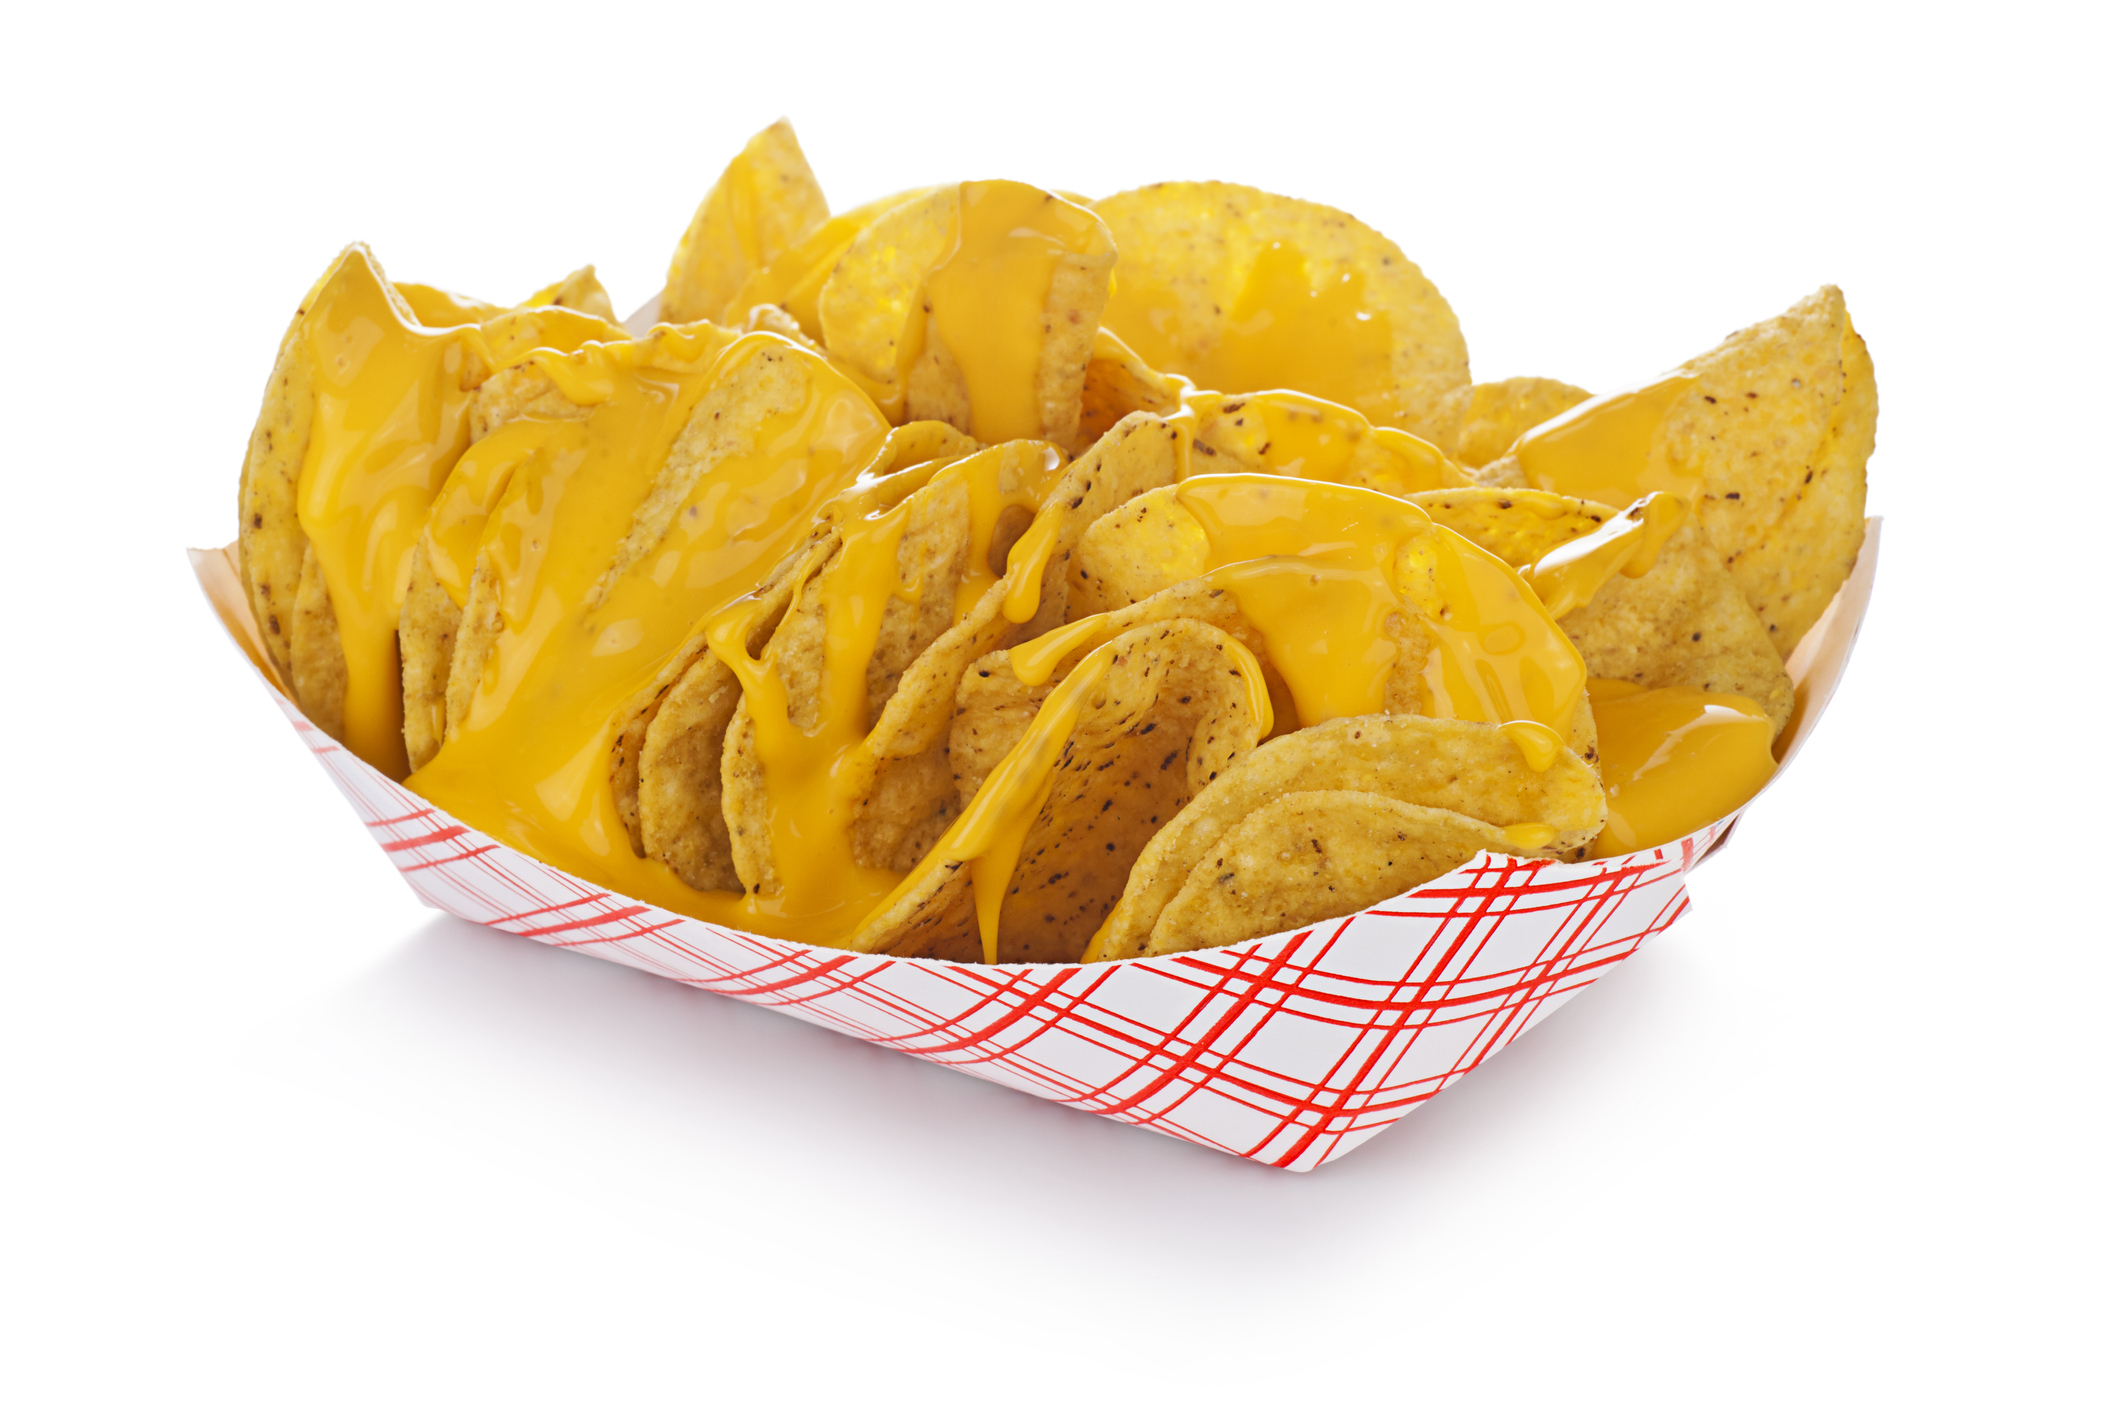 A basket of tortilla chips covered in melted cheese